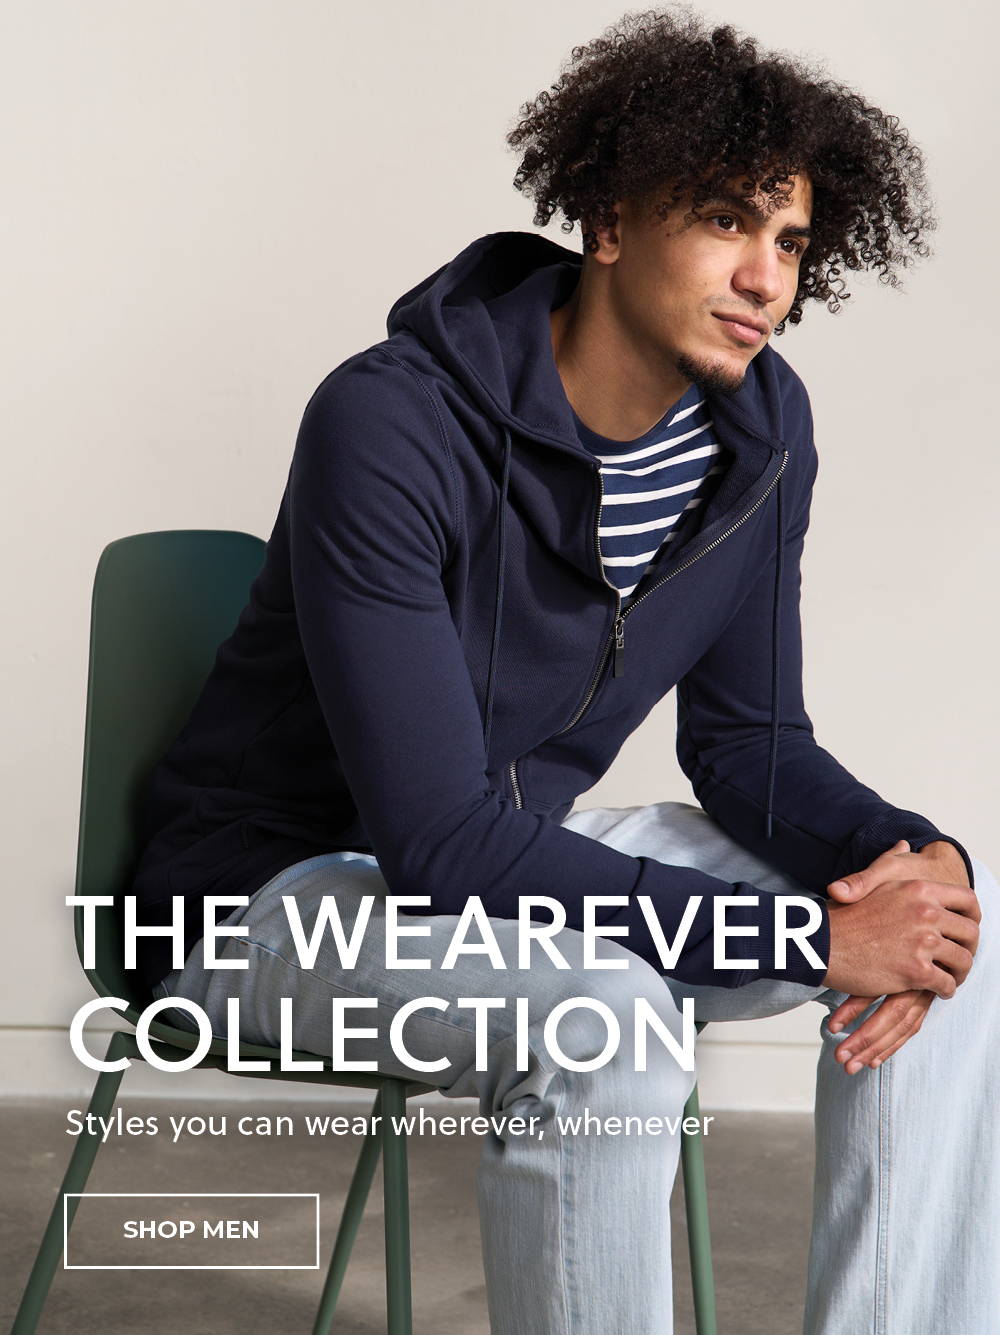 The Wearever Collection. Styles you can wear wherever, whenever by American Tall.